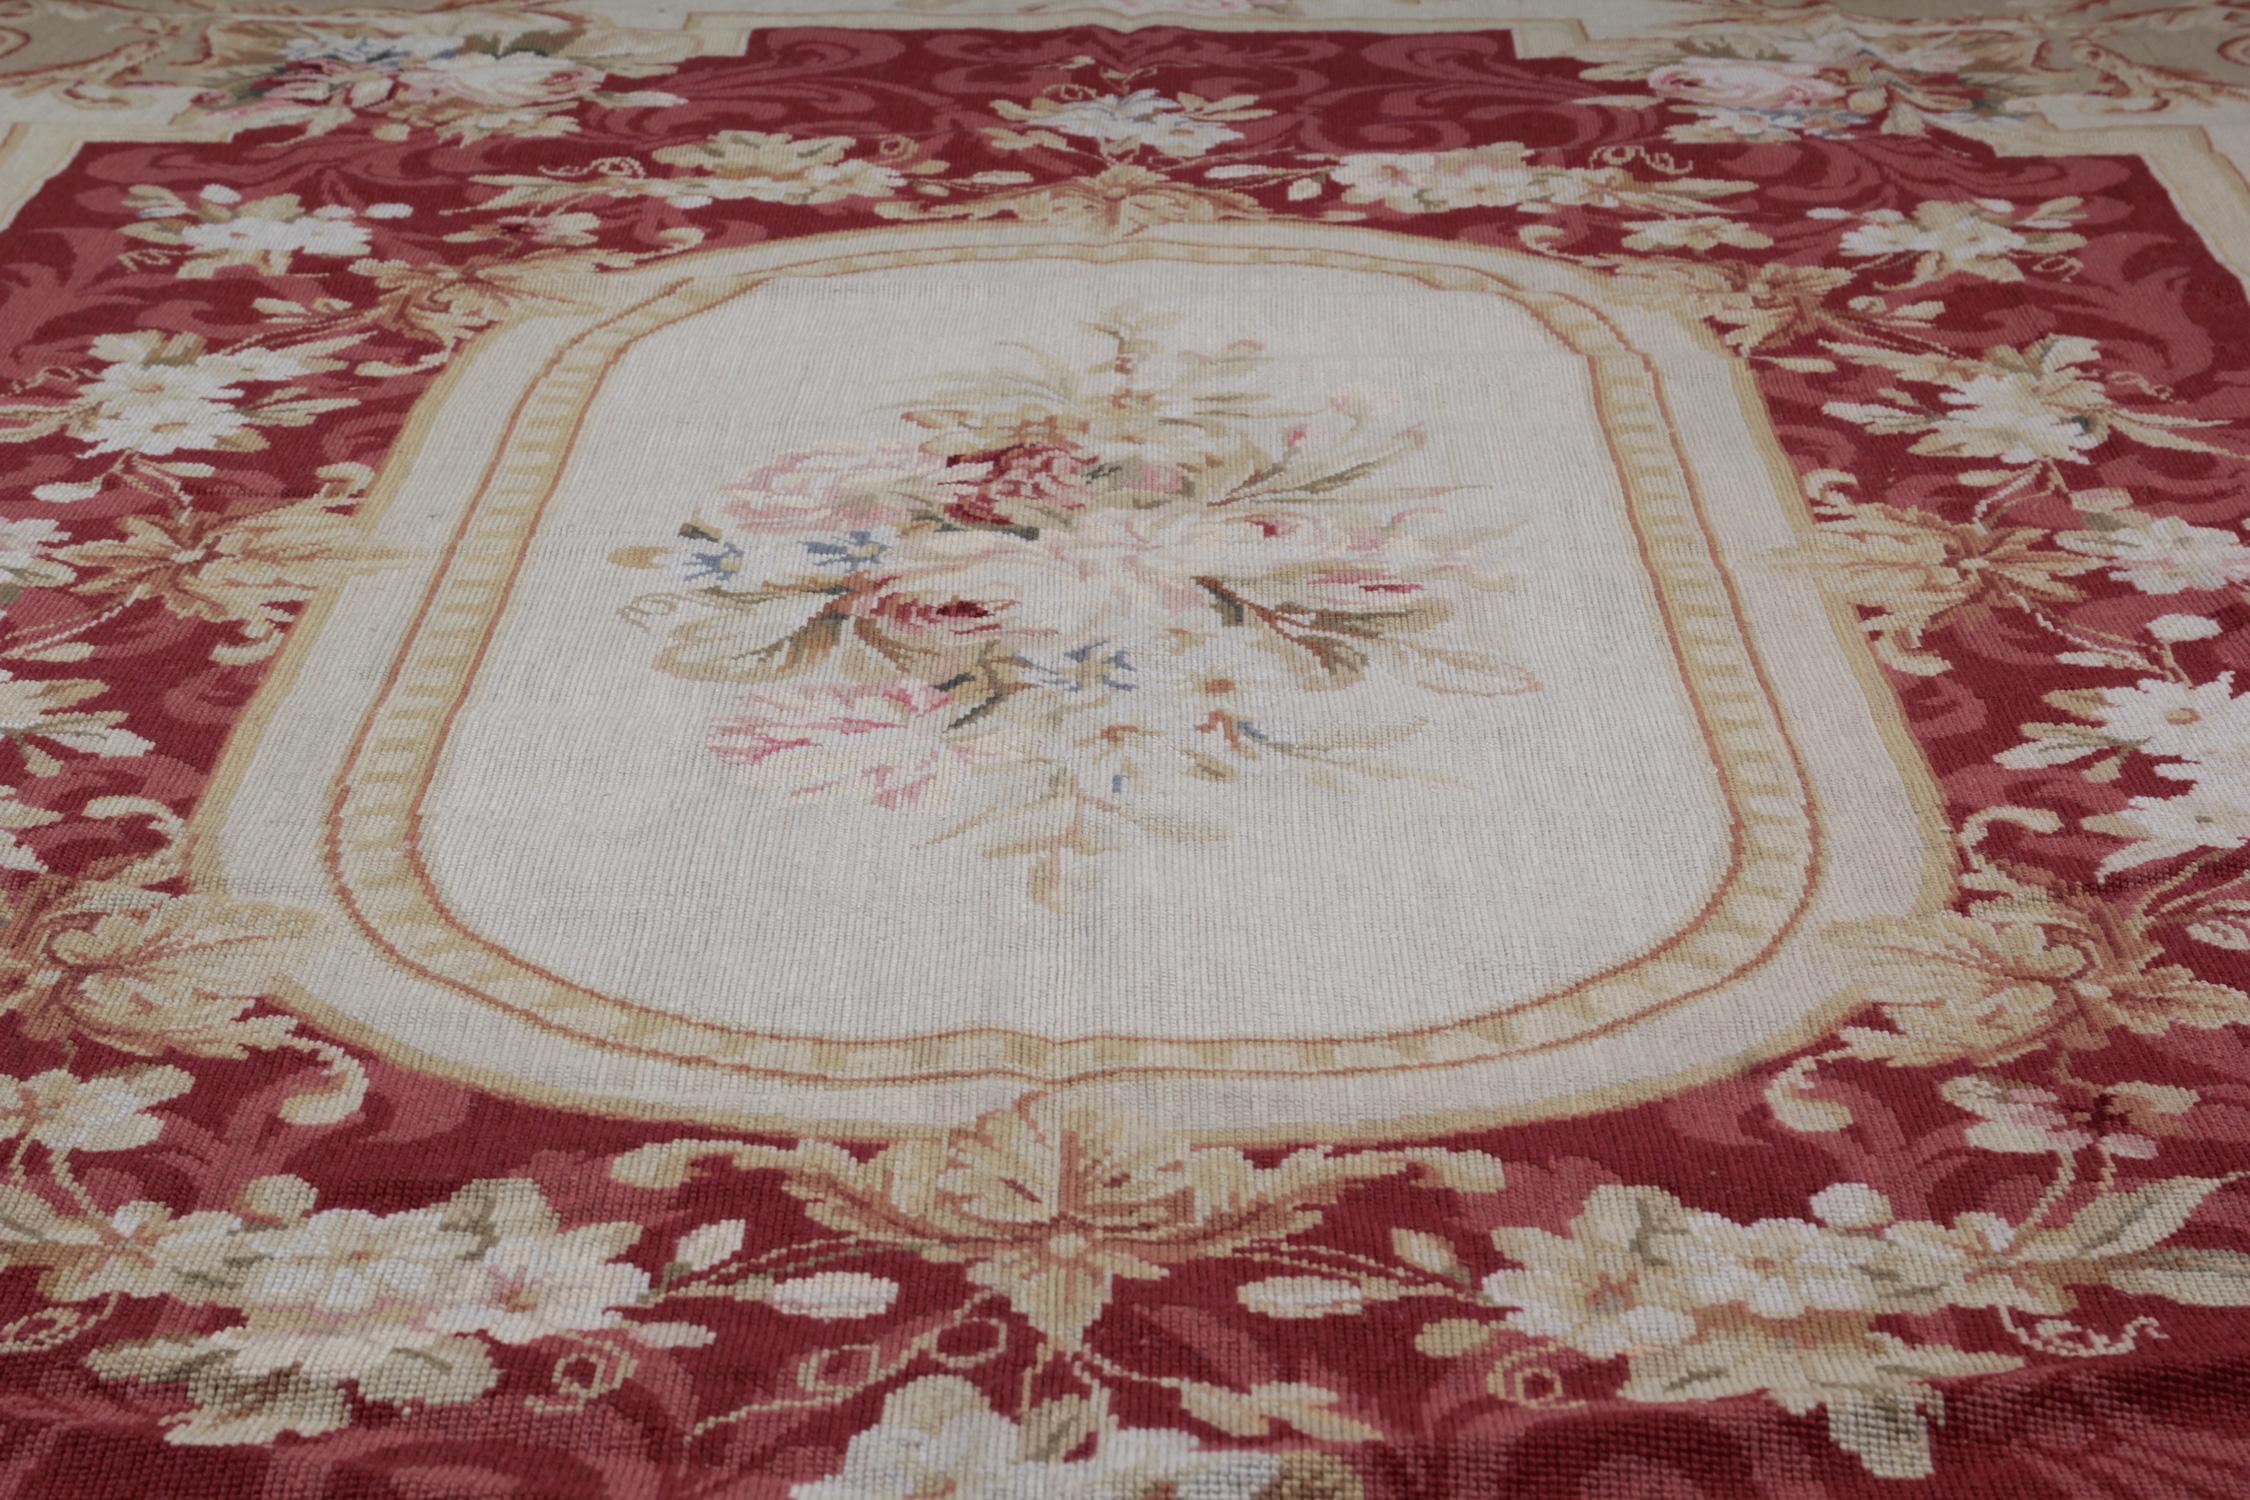 Hand-Crafted Traditional Handwoven Floral Tapestry, French Design Aubusson Style Needlepoint